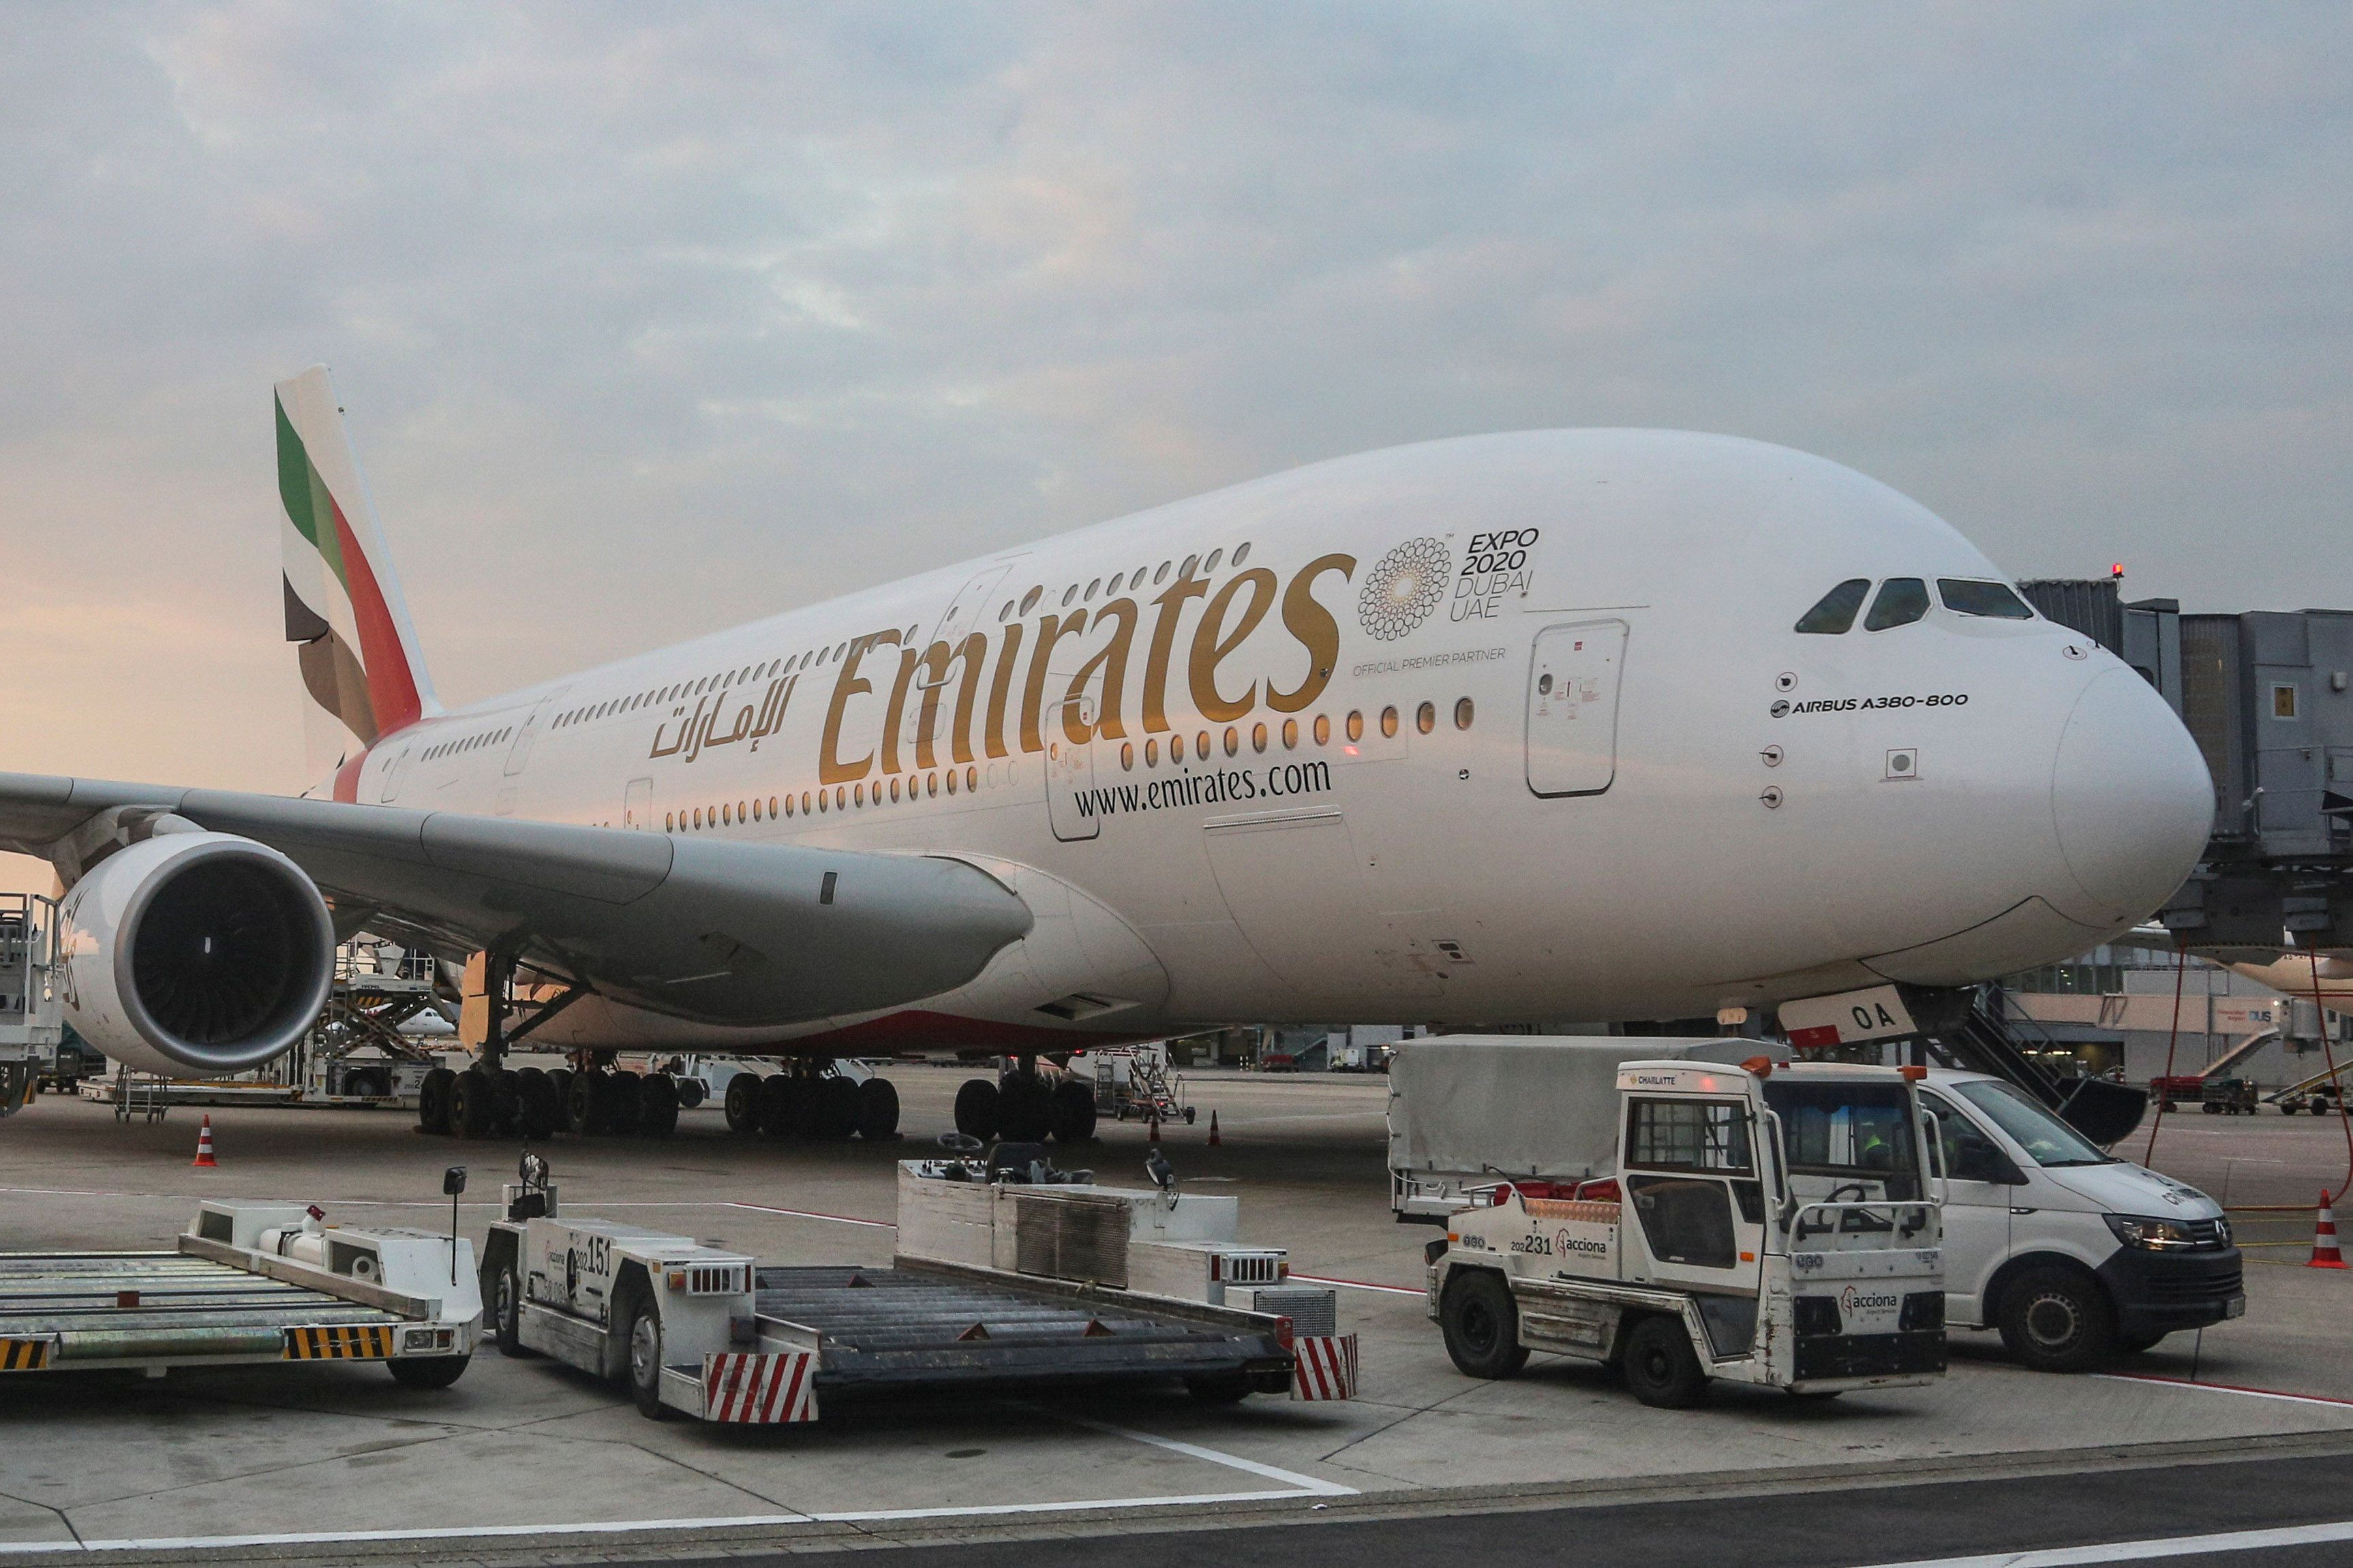 Emirates will offer all 4 classes on its direct flights to Auckland